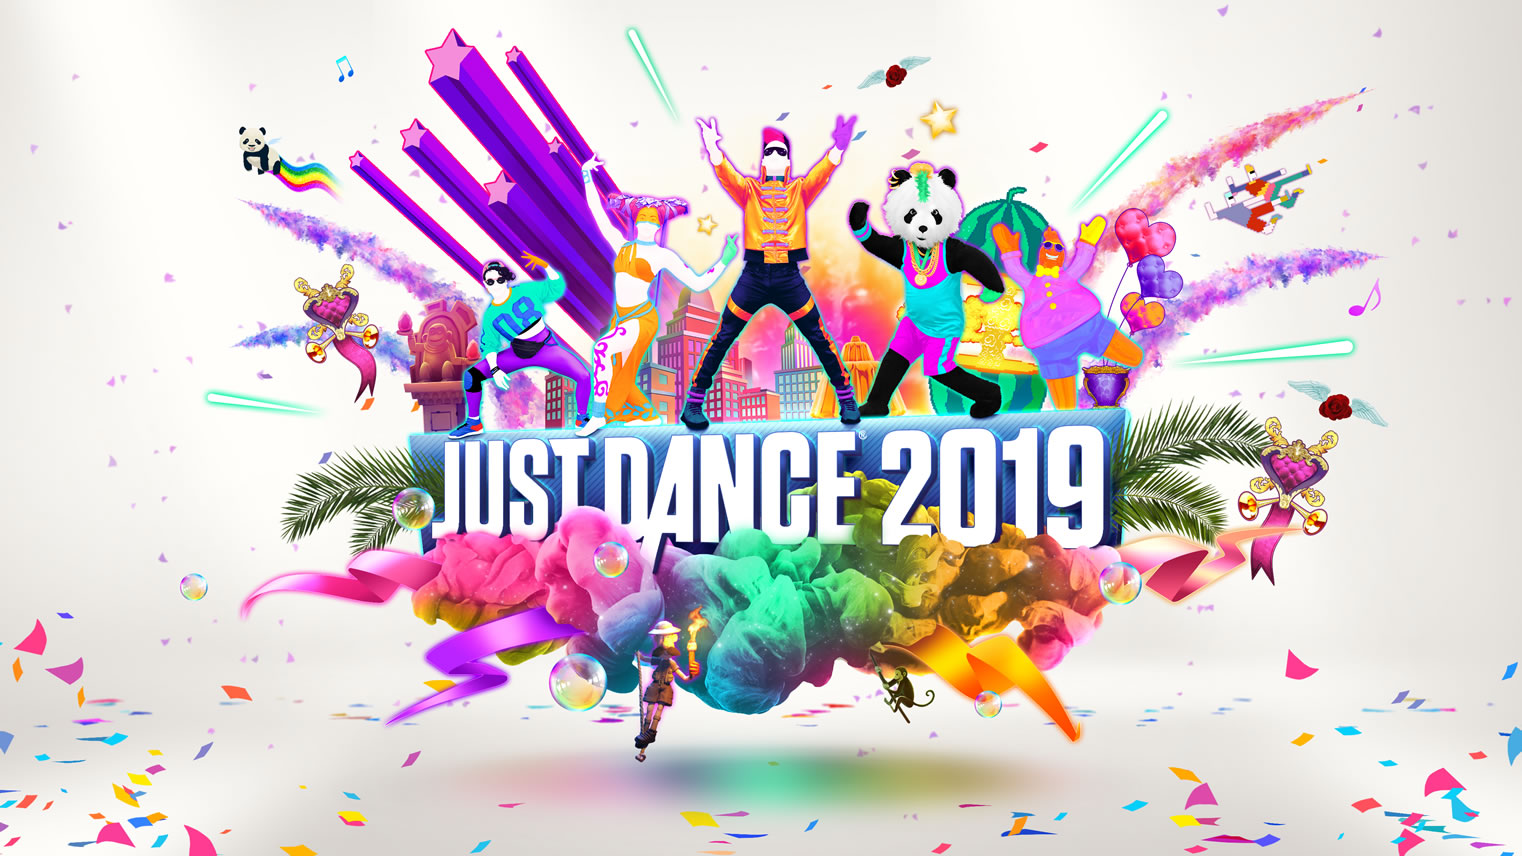 launches the and Dance The Tech Just 2019 Ubisoft Xbox, Revolutionist PS4 - Switch, for